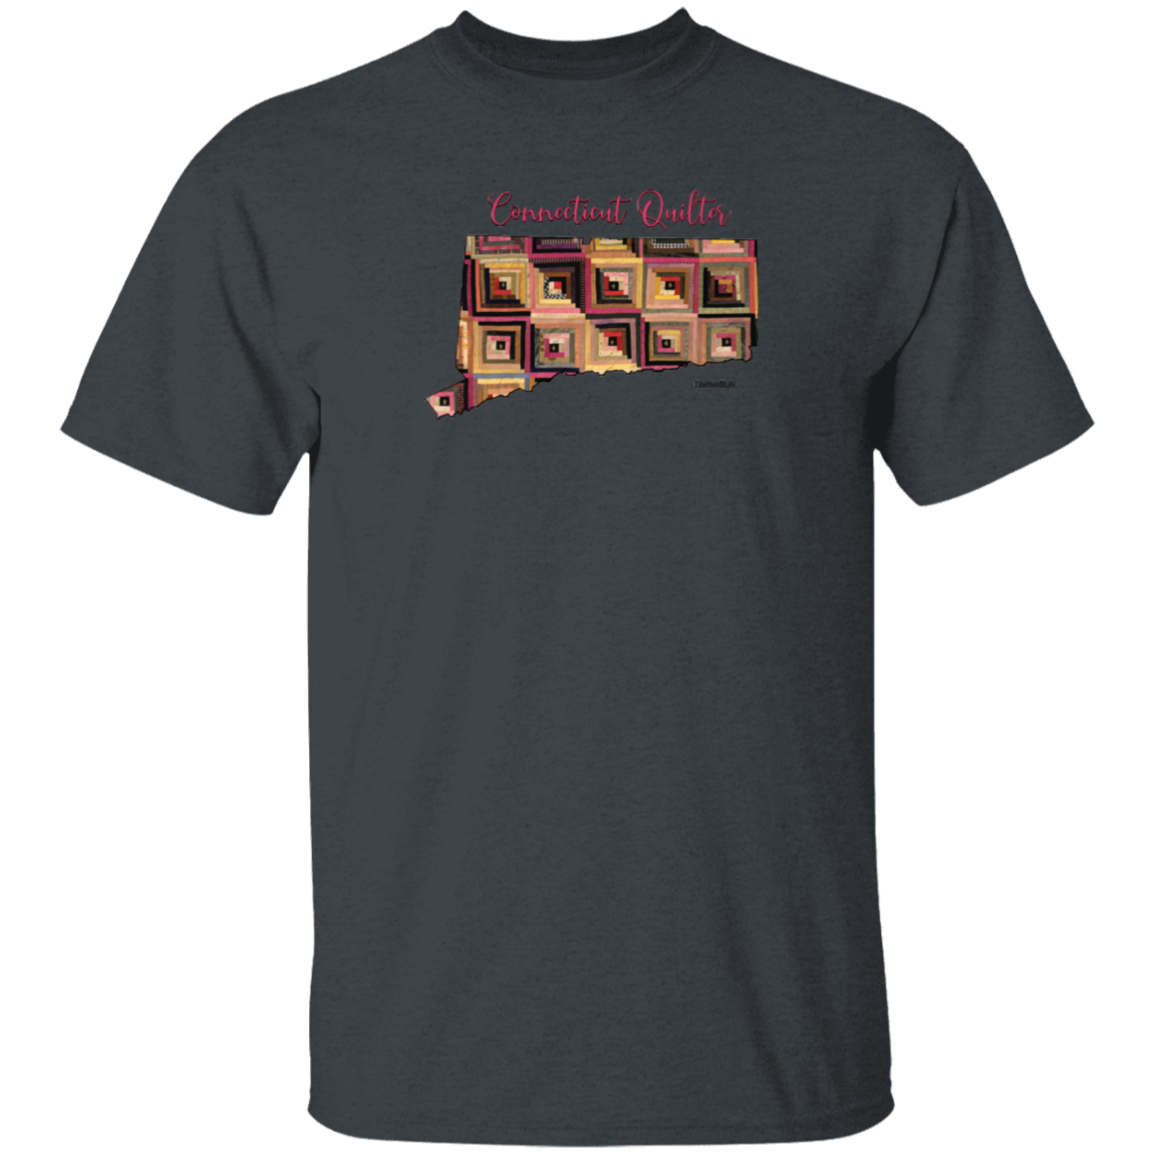 Connecticut Quilter T-Shirt, Gift for Quilting Friends and Family